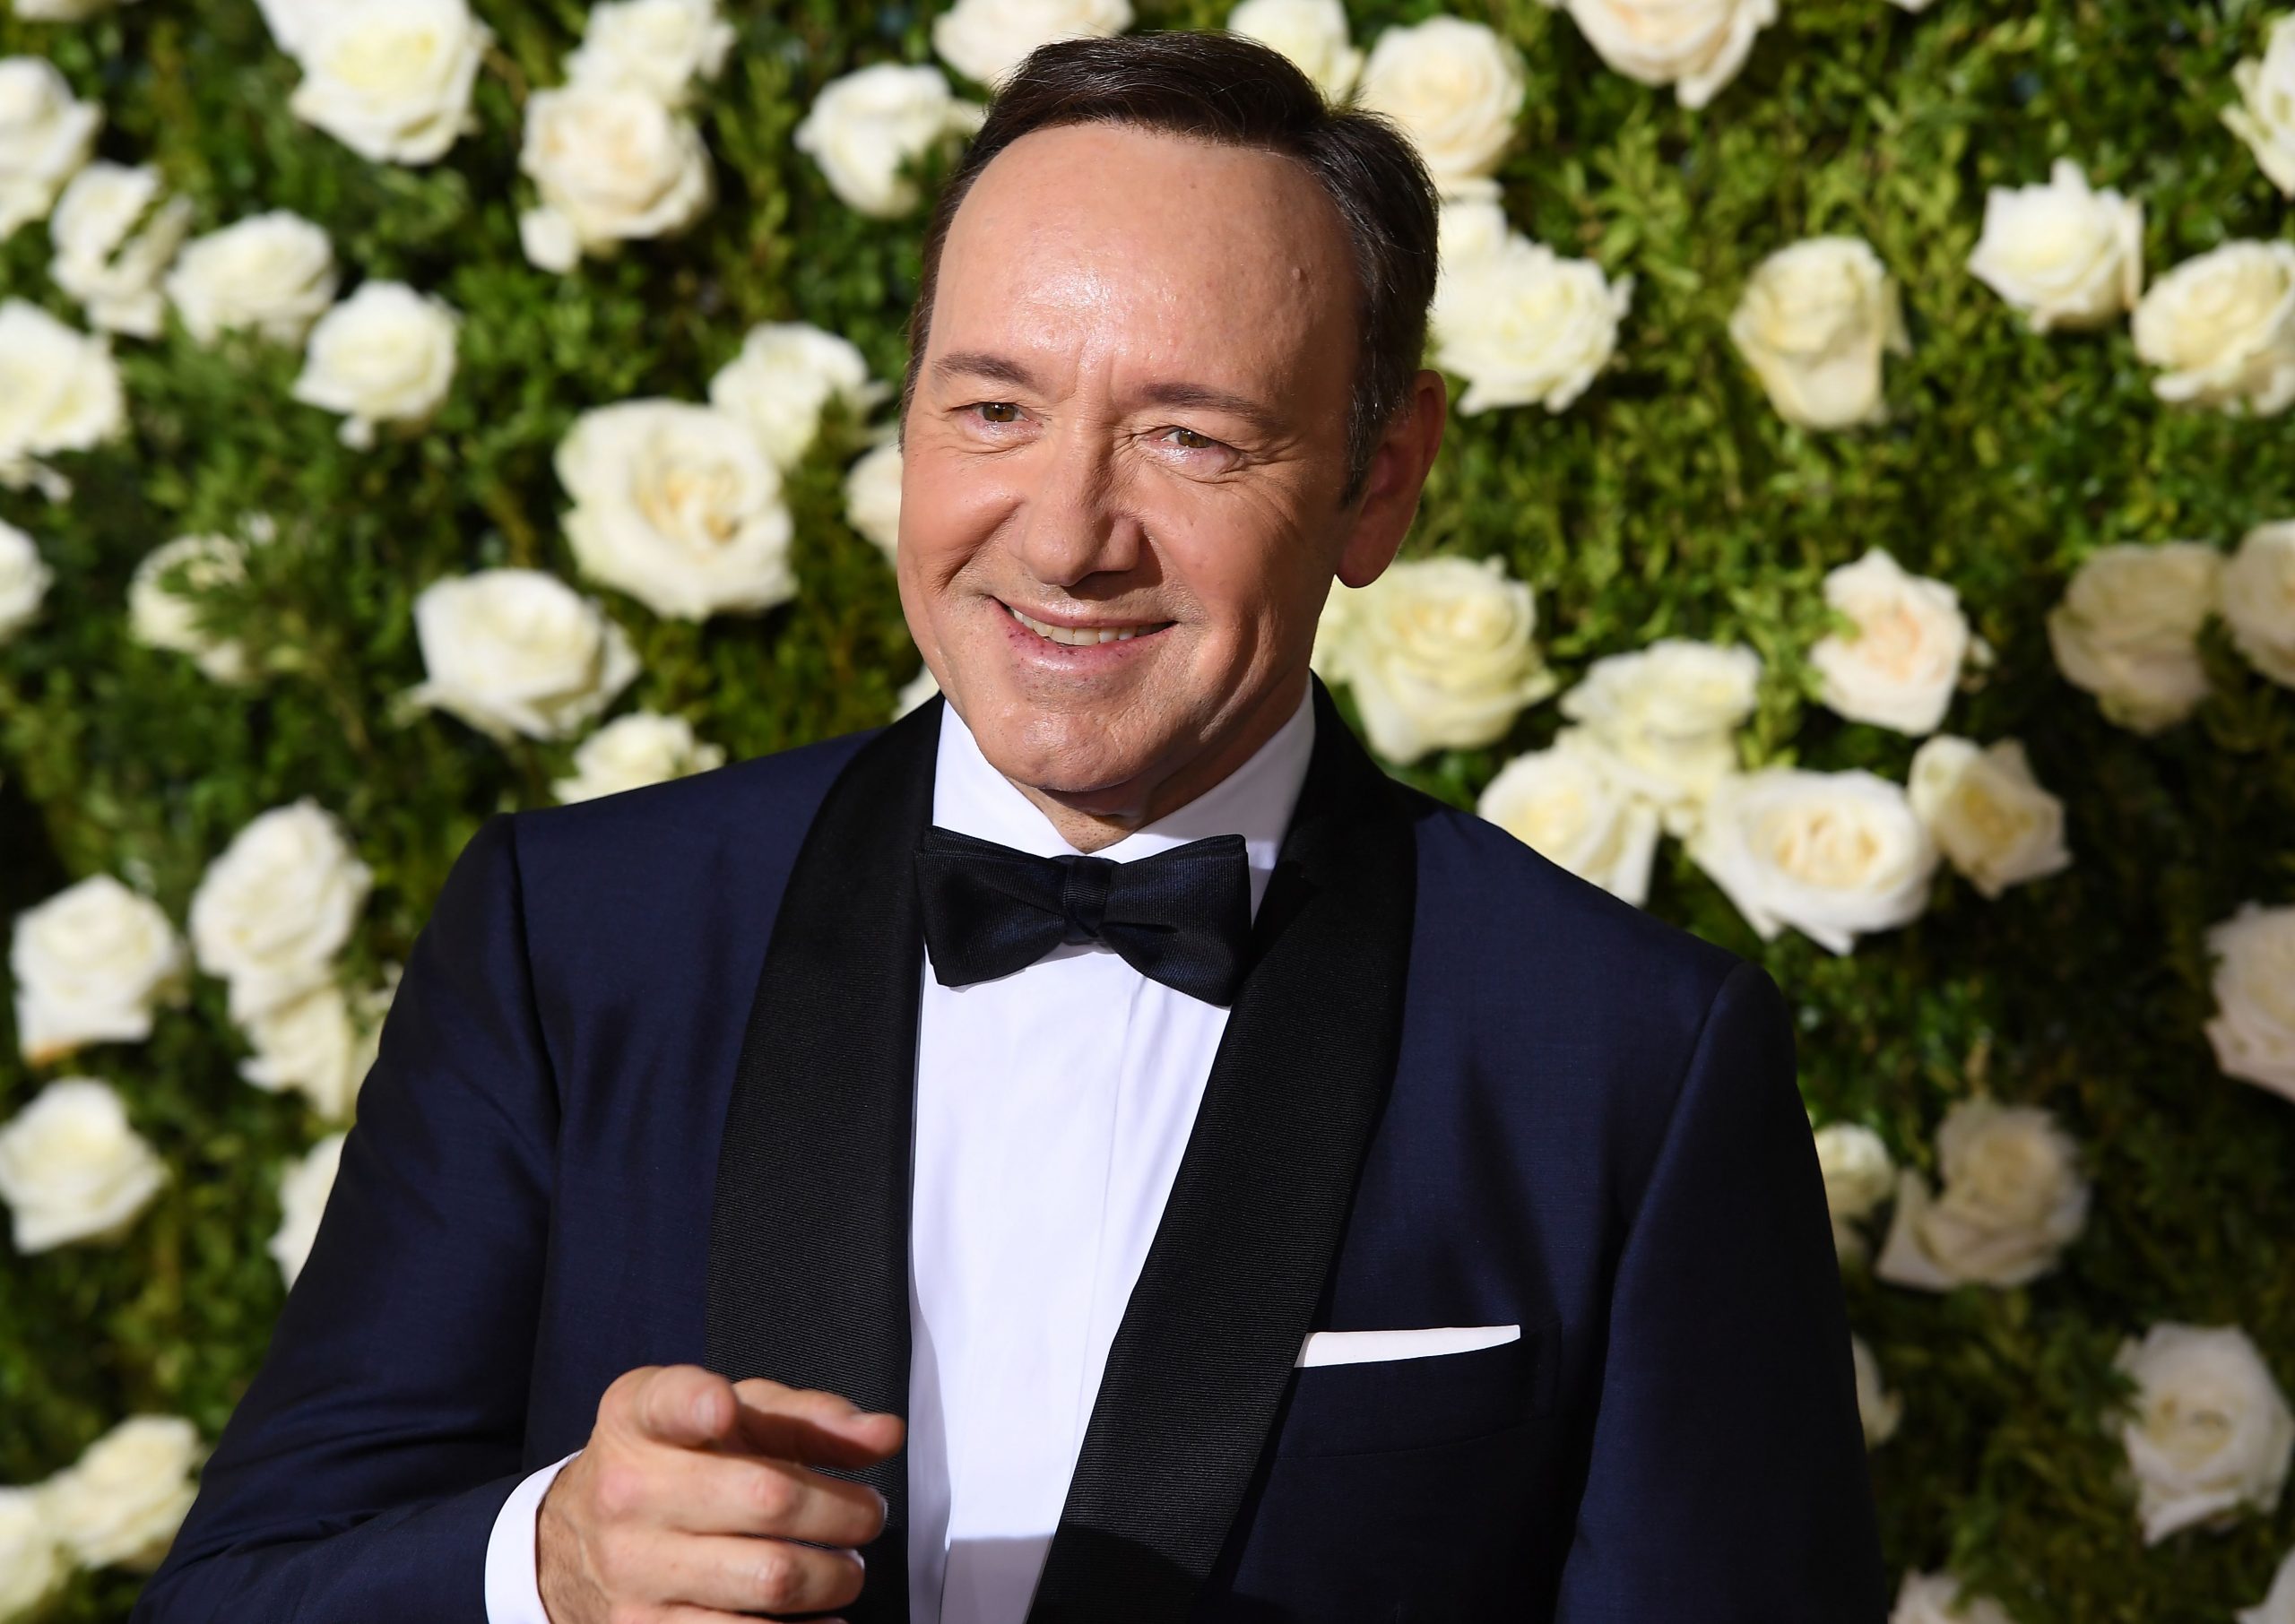 Kevin Spacey Wins 1986 Sexual Assault Civil Lawsuit Brought By Anthony Rapp Easterneye